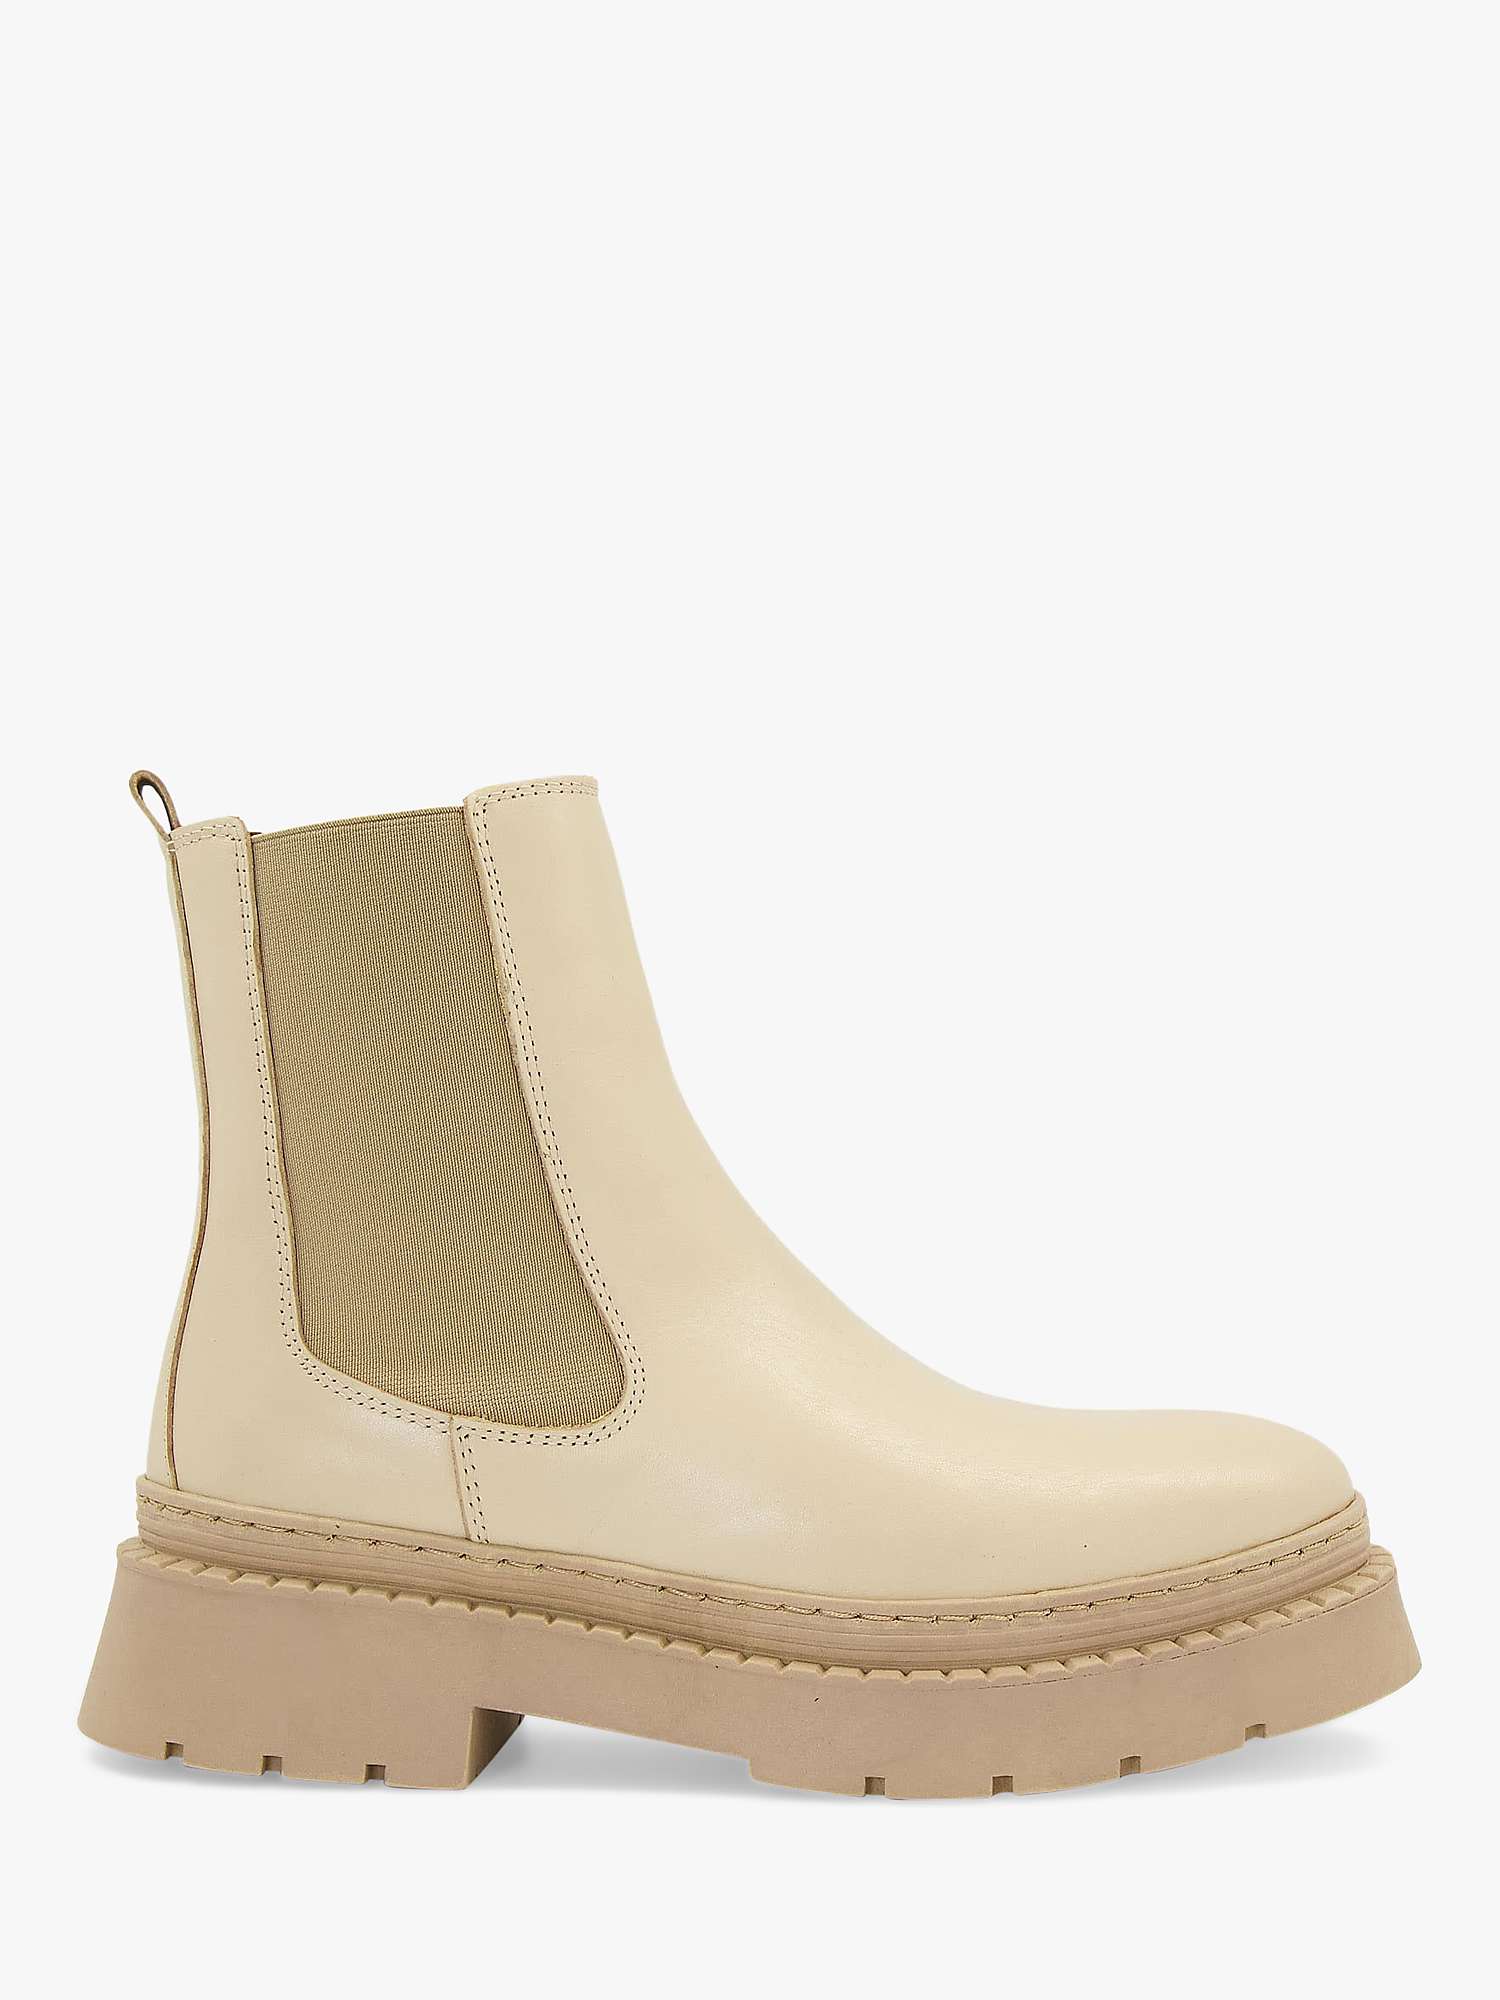 Dune Photograph Leather Ankle Boots, Ecru at John Lewis & Partners